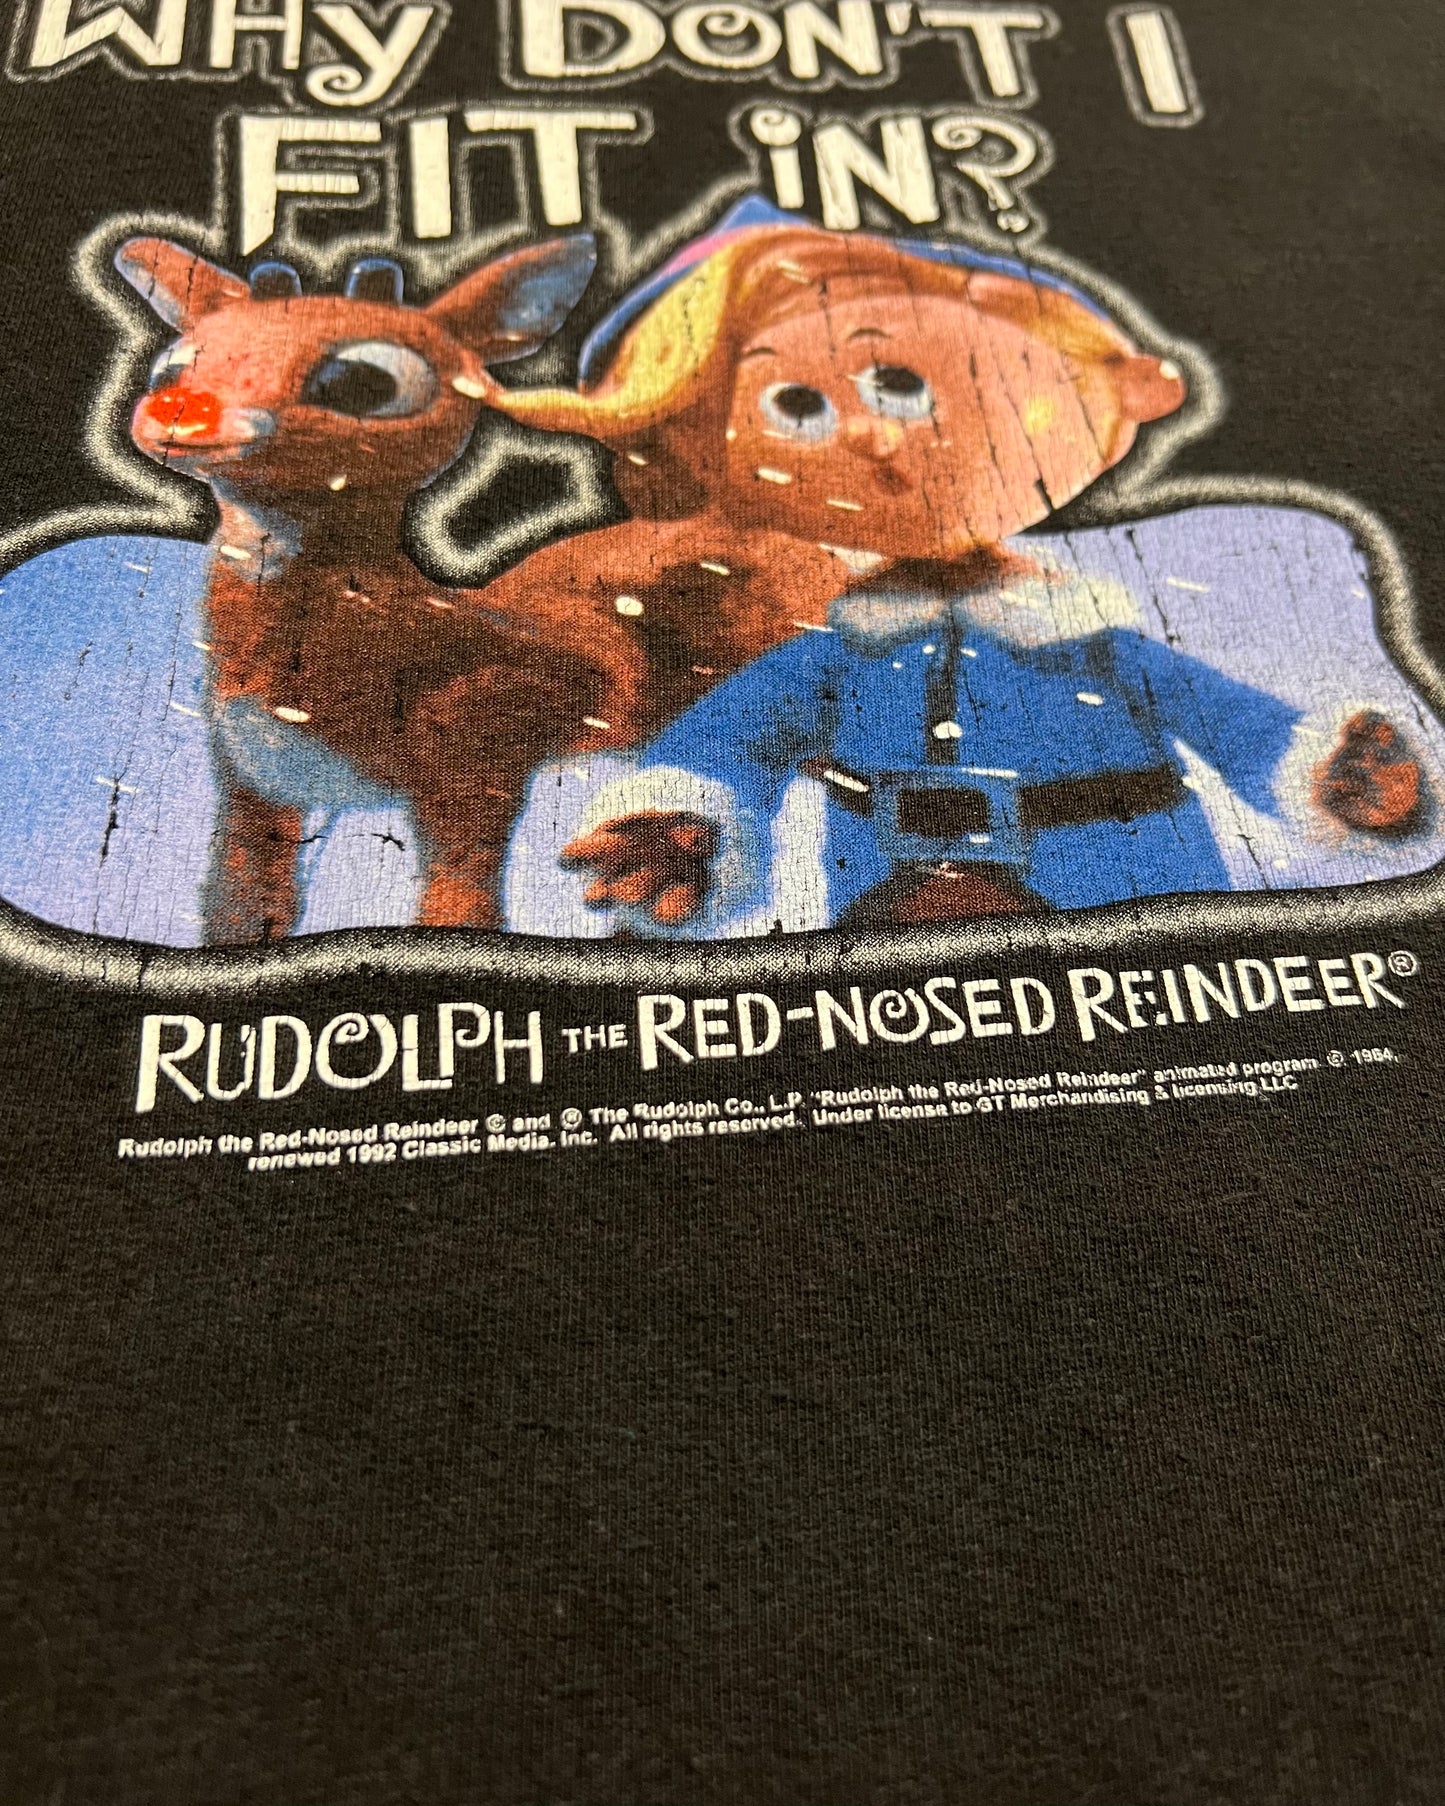 Vintage "Why Don't I Fit in?" Rudolph the Red Nosed Reindeer T-Shirt